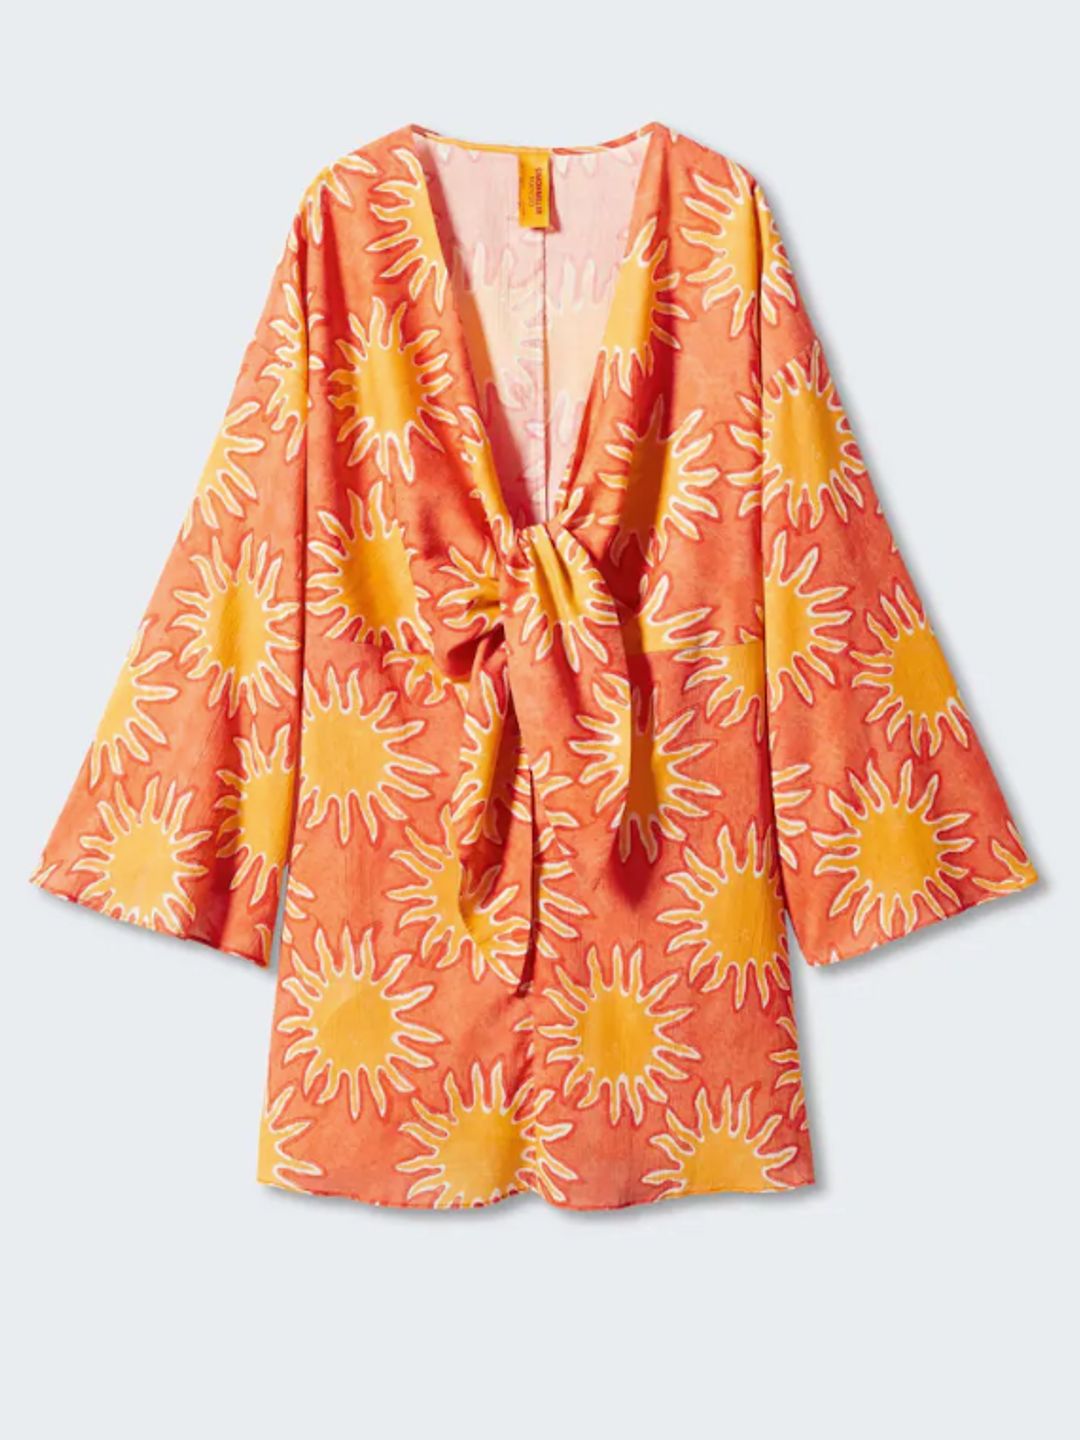 Printed dress with knot detail - Mango 